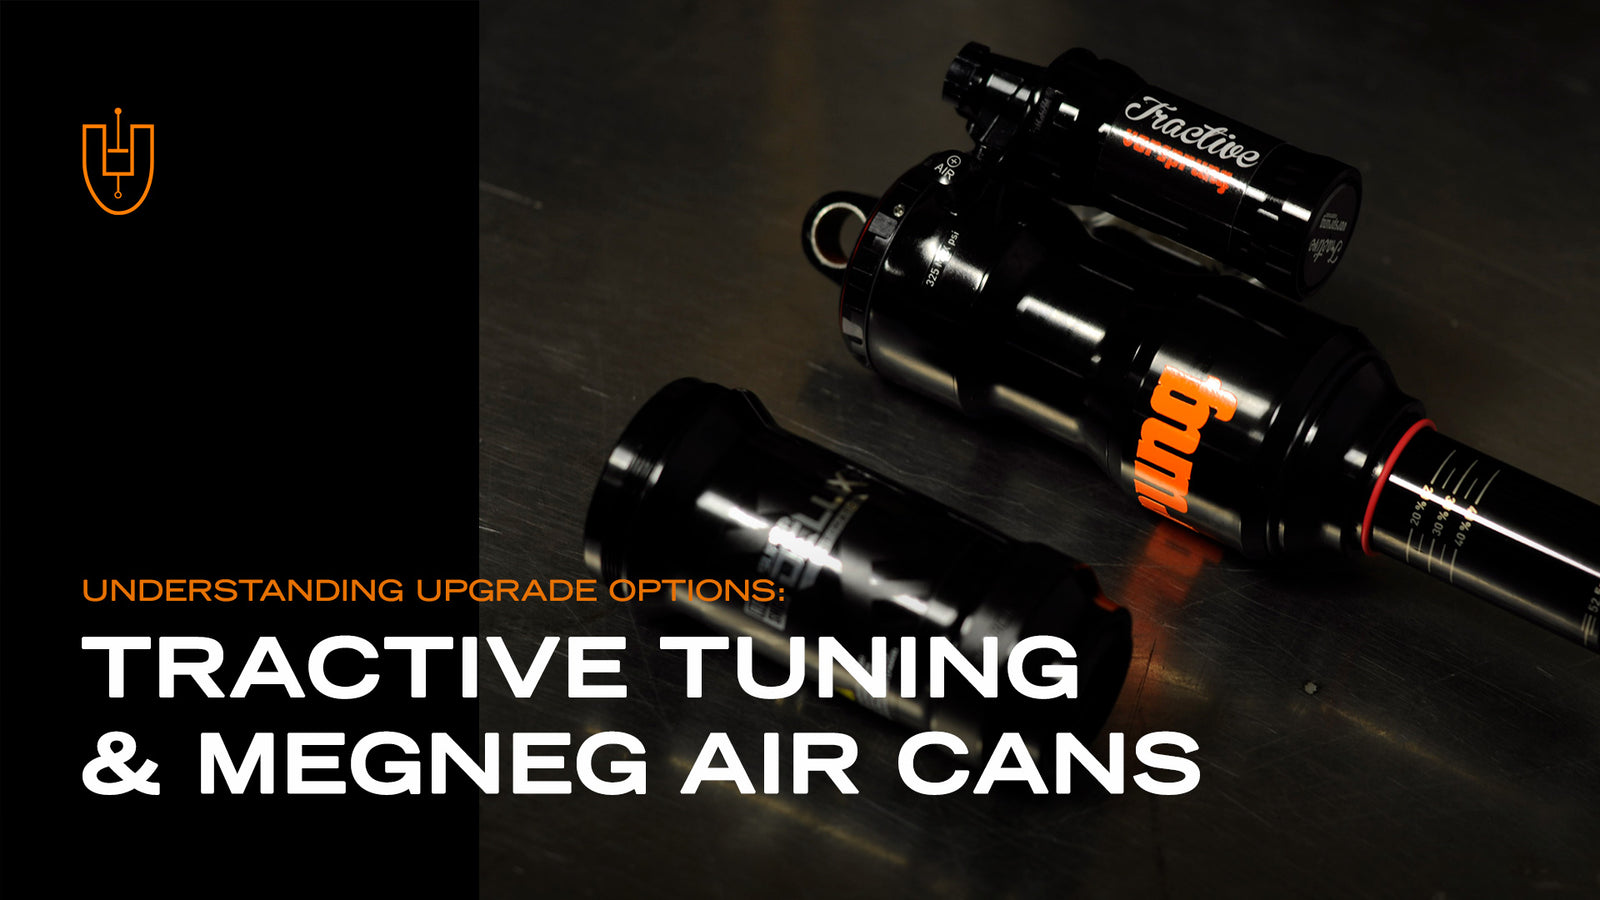 Understanding Upgrade Options: Tractive Tuning & Megneg Air Cans